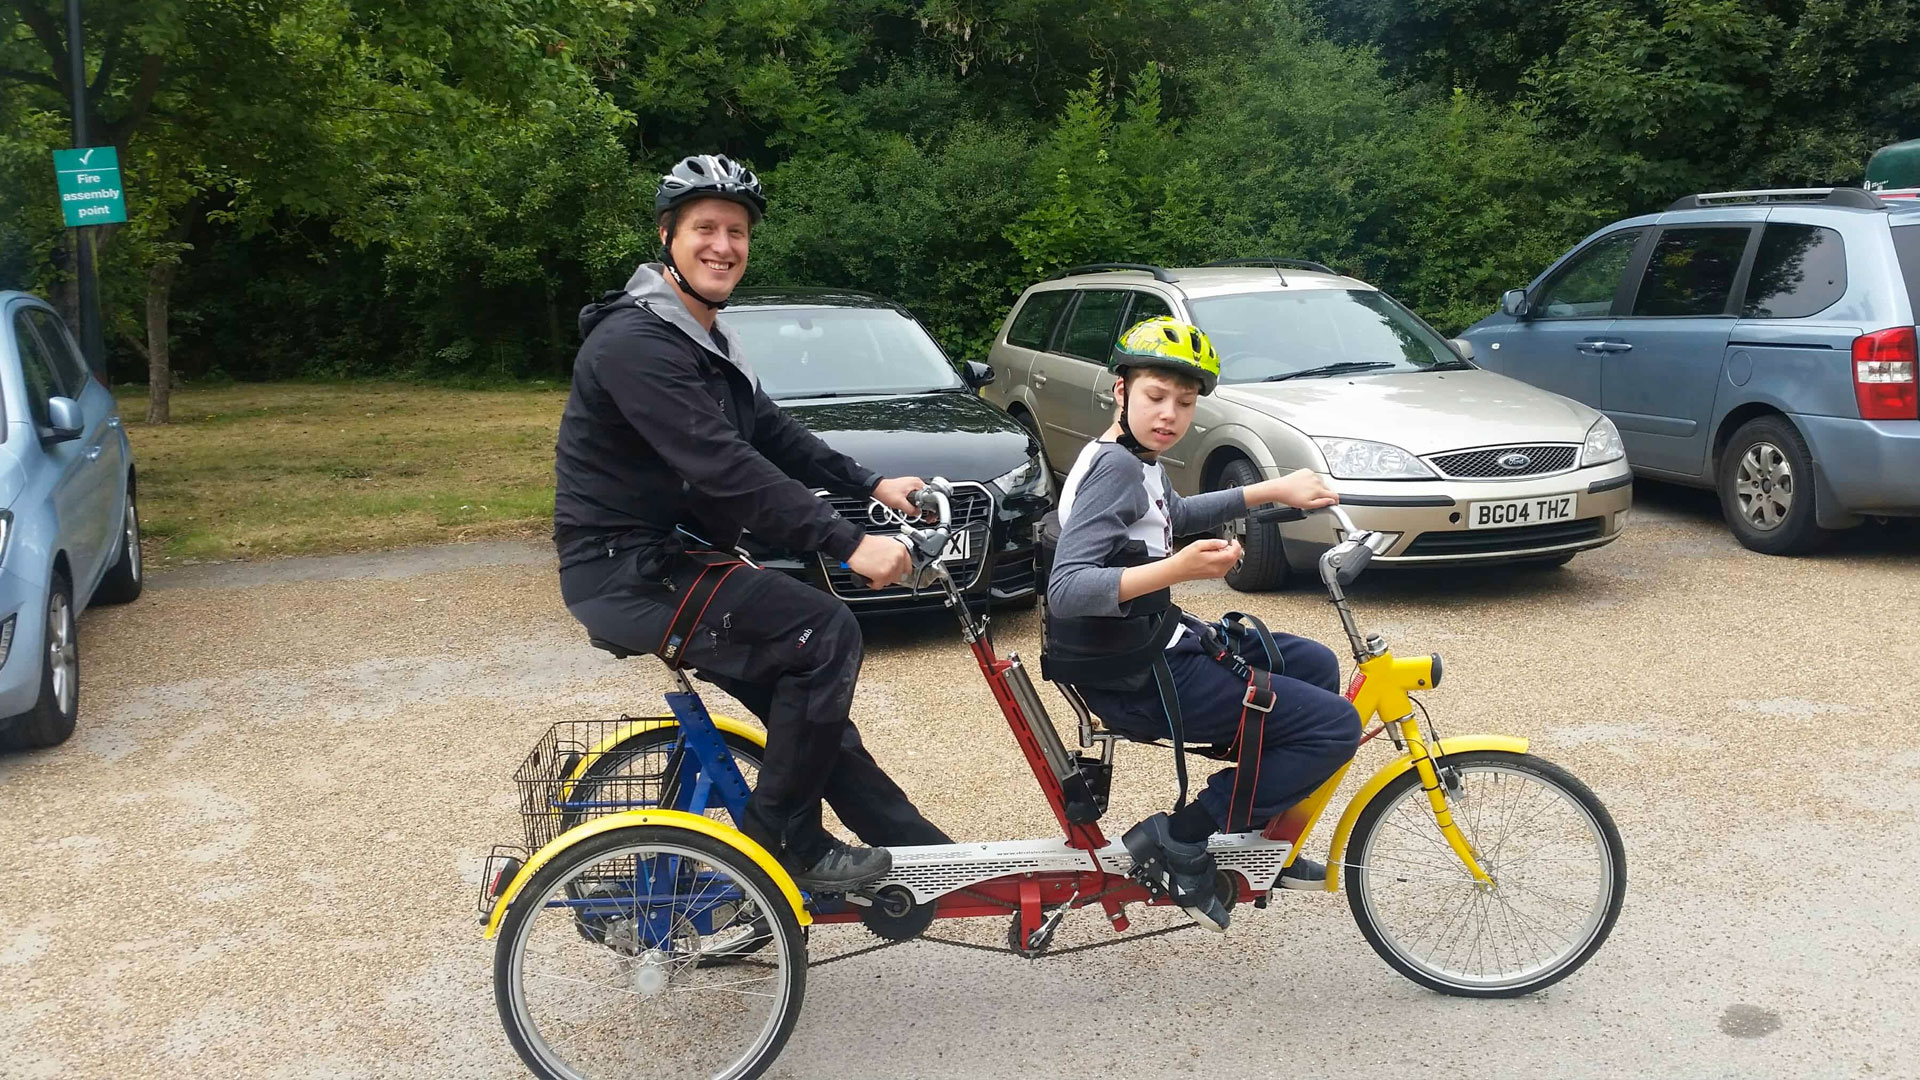 Action4Youth’s disability bikes enable ALL CHILDREN to enjoy an exhilarating Cycle Xperience